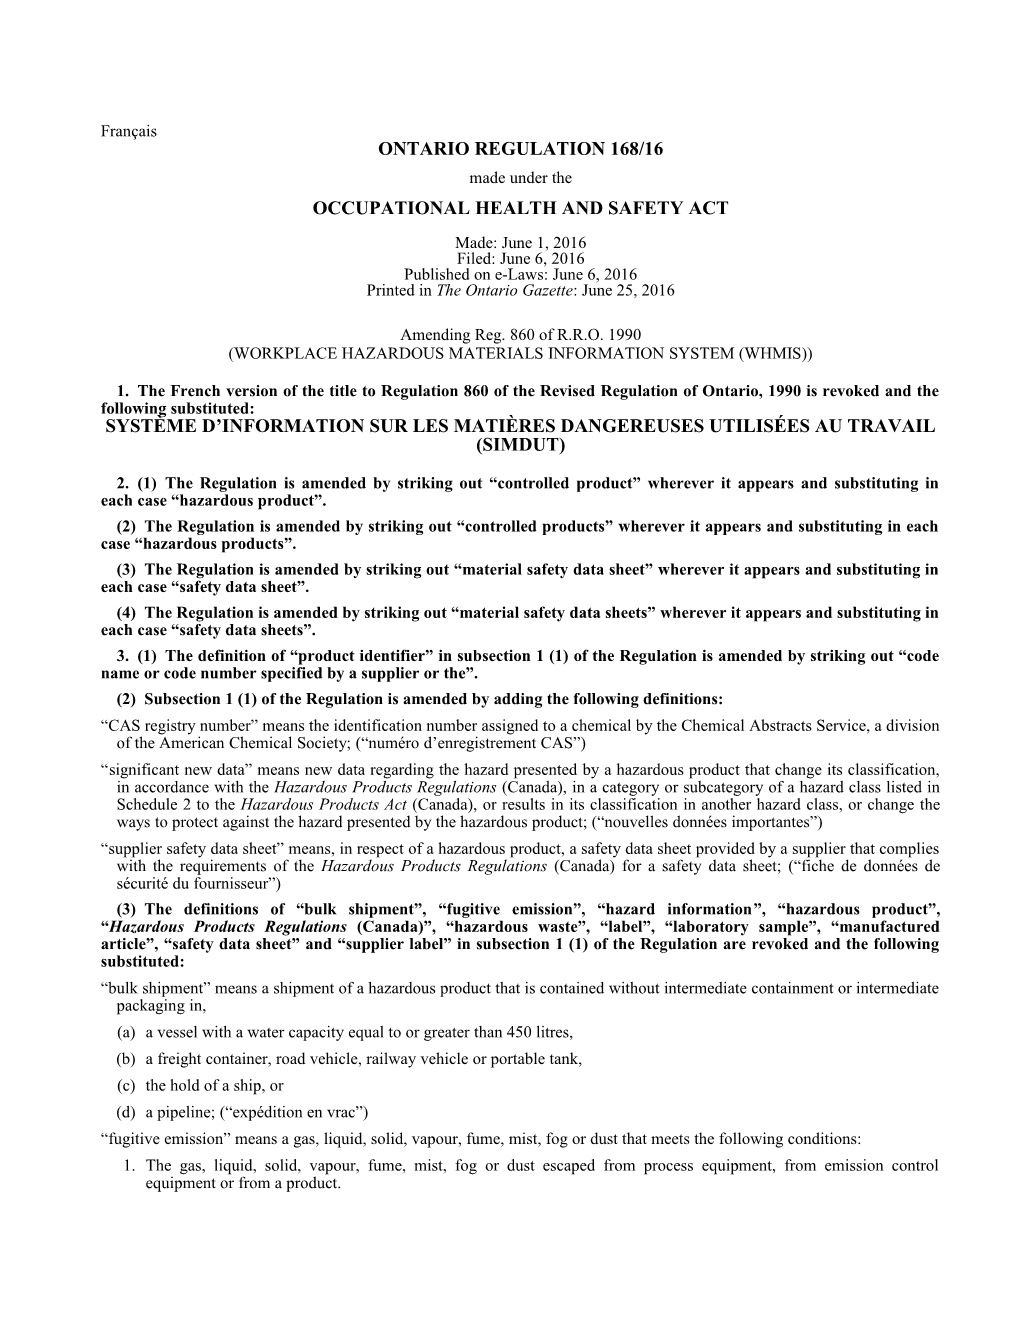 OCCUPATIONAL HEALTH and SAFETY ACT - O. Reg. 168/16